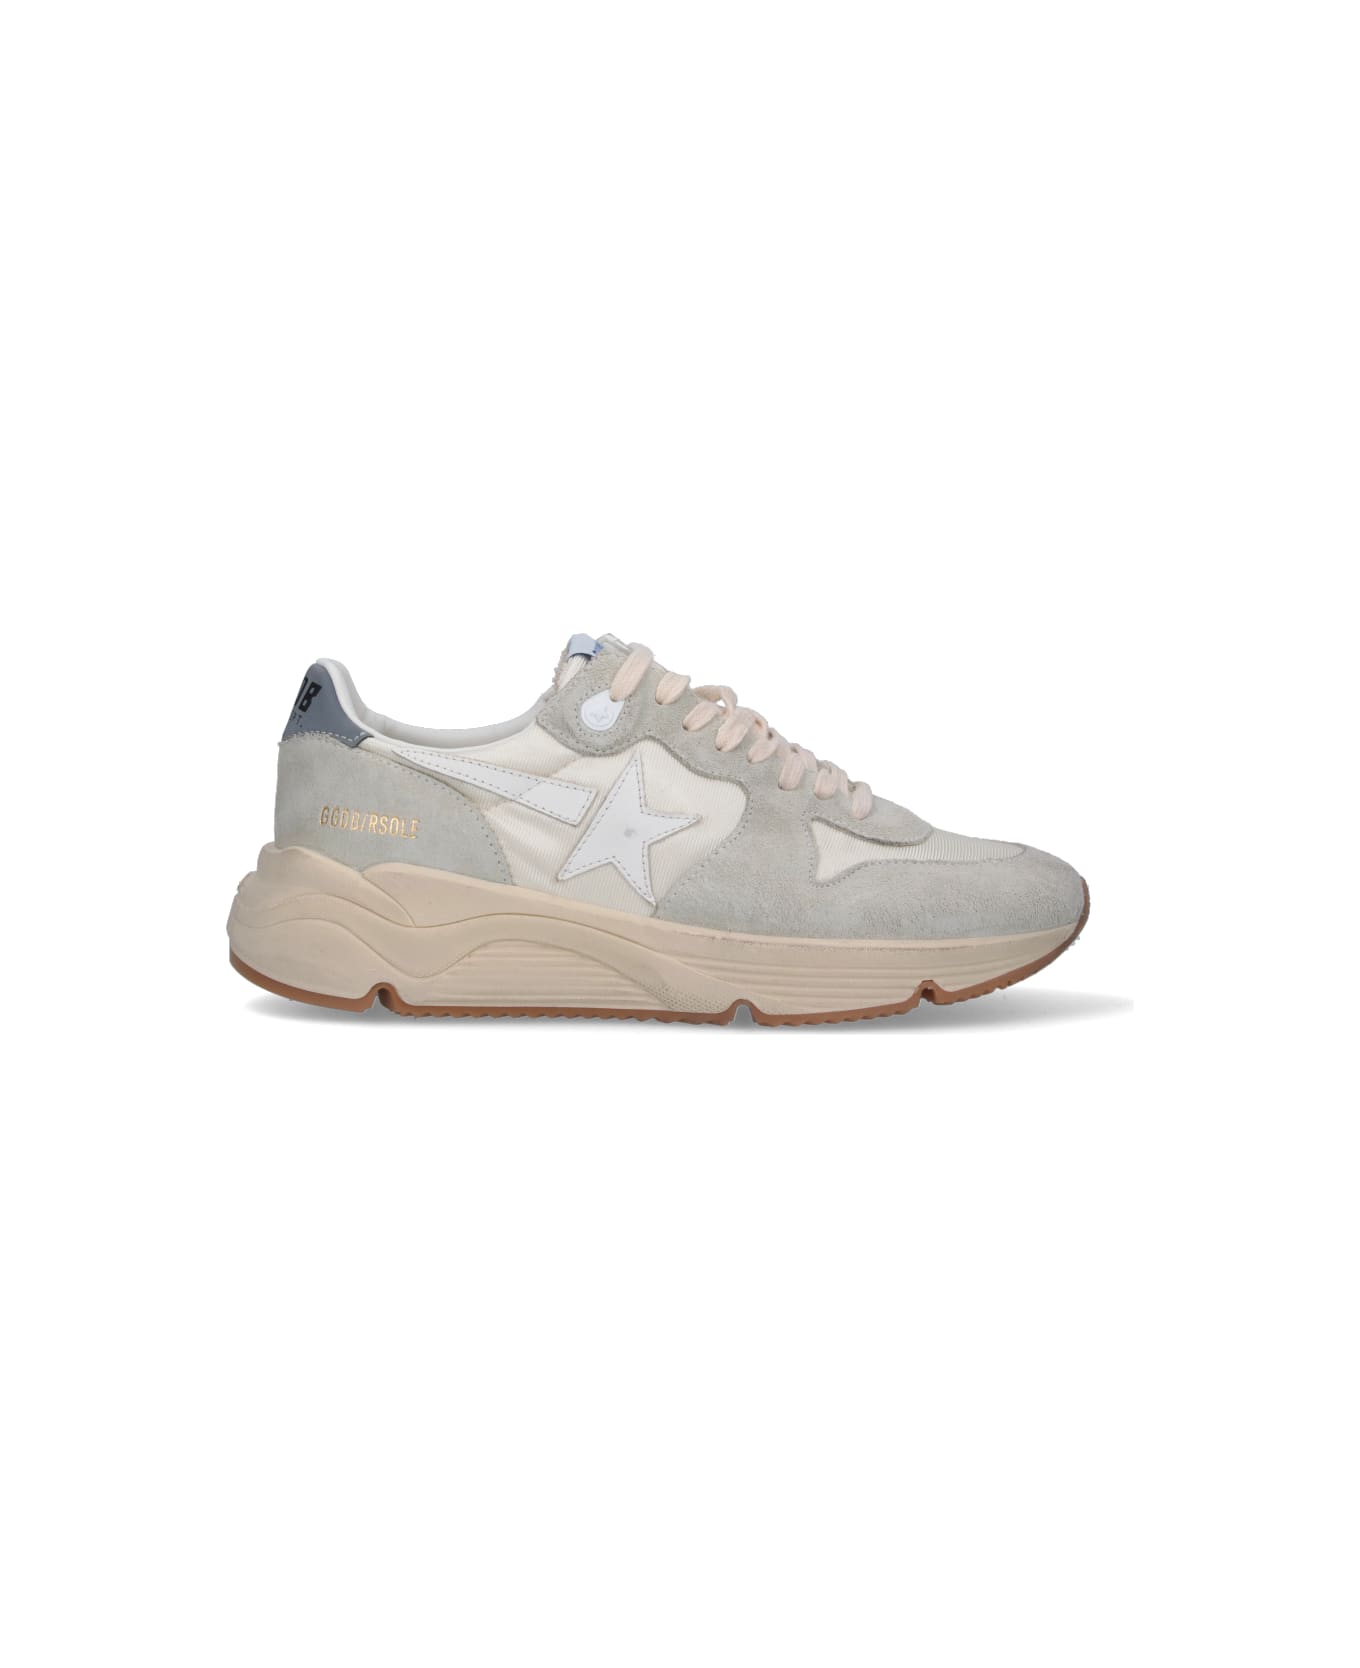 Golden Goose Running Sole Lace-up Sneakers - Cream